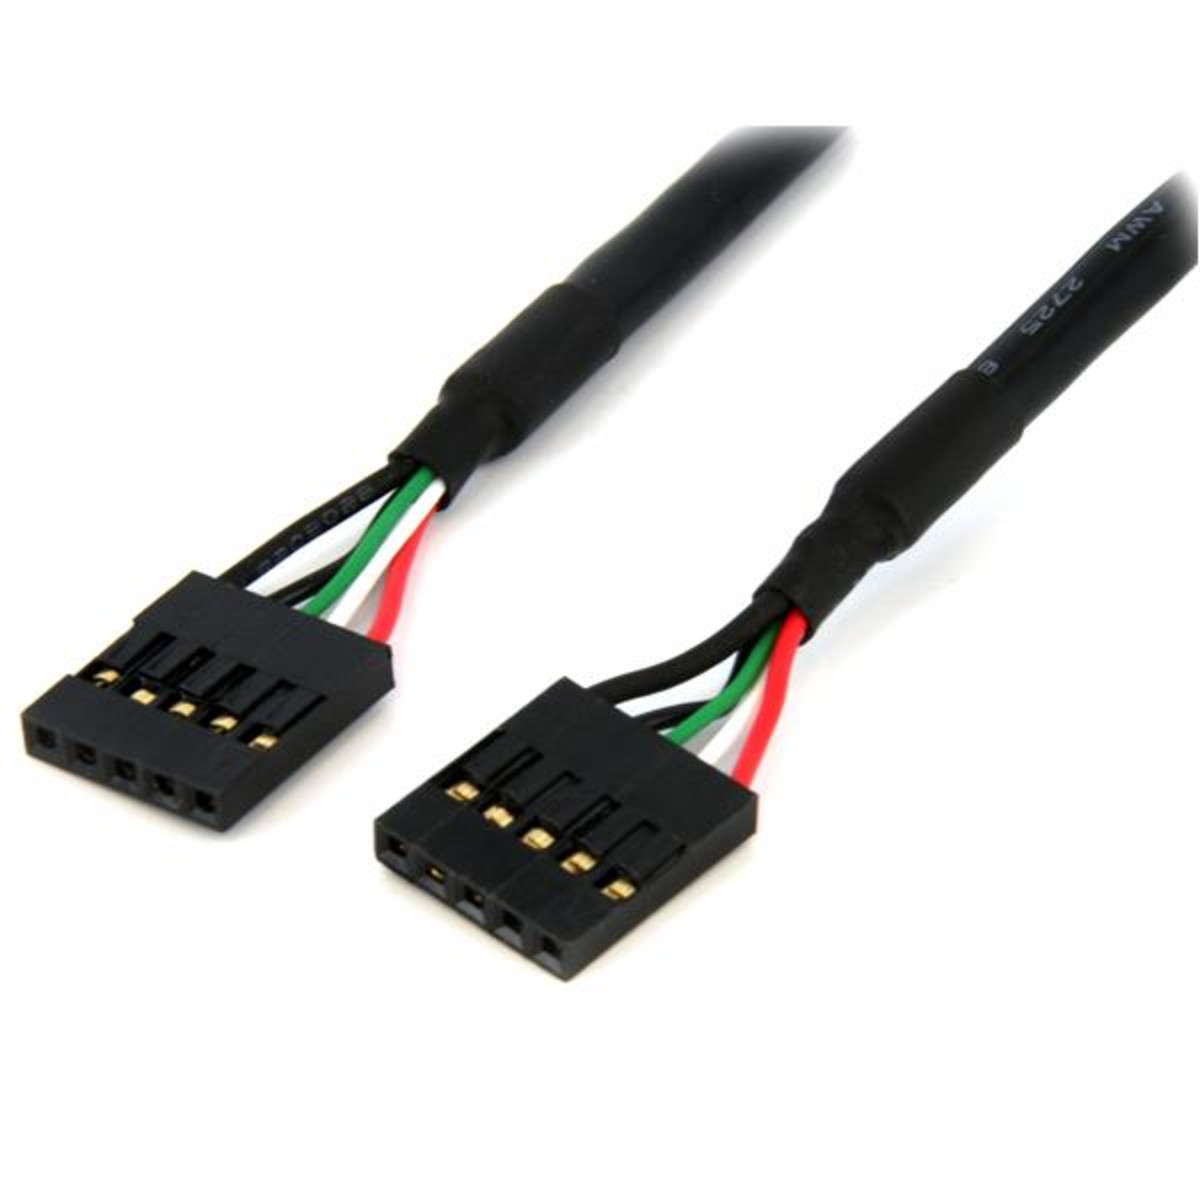 18in Int 5 pin USB IDC Mbrd Header Cable